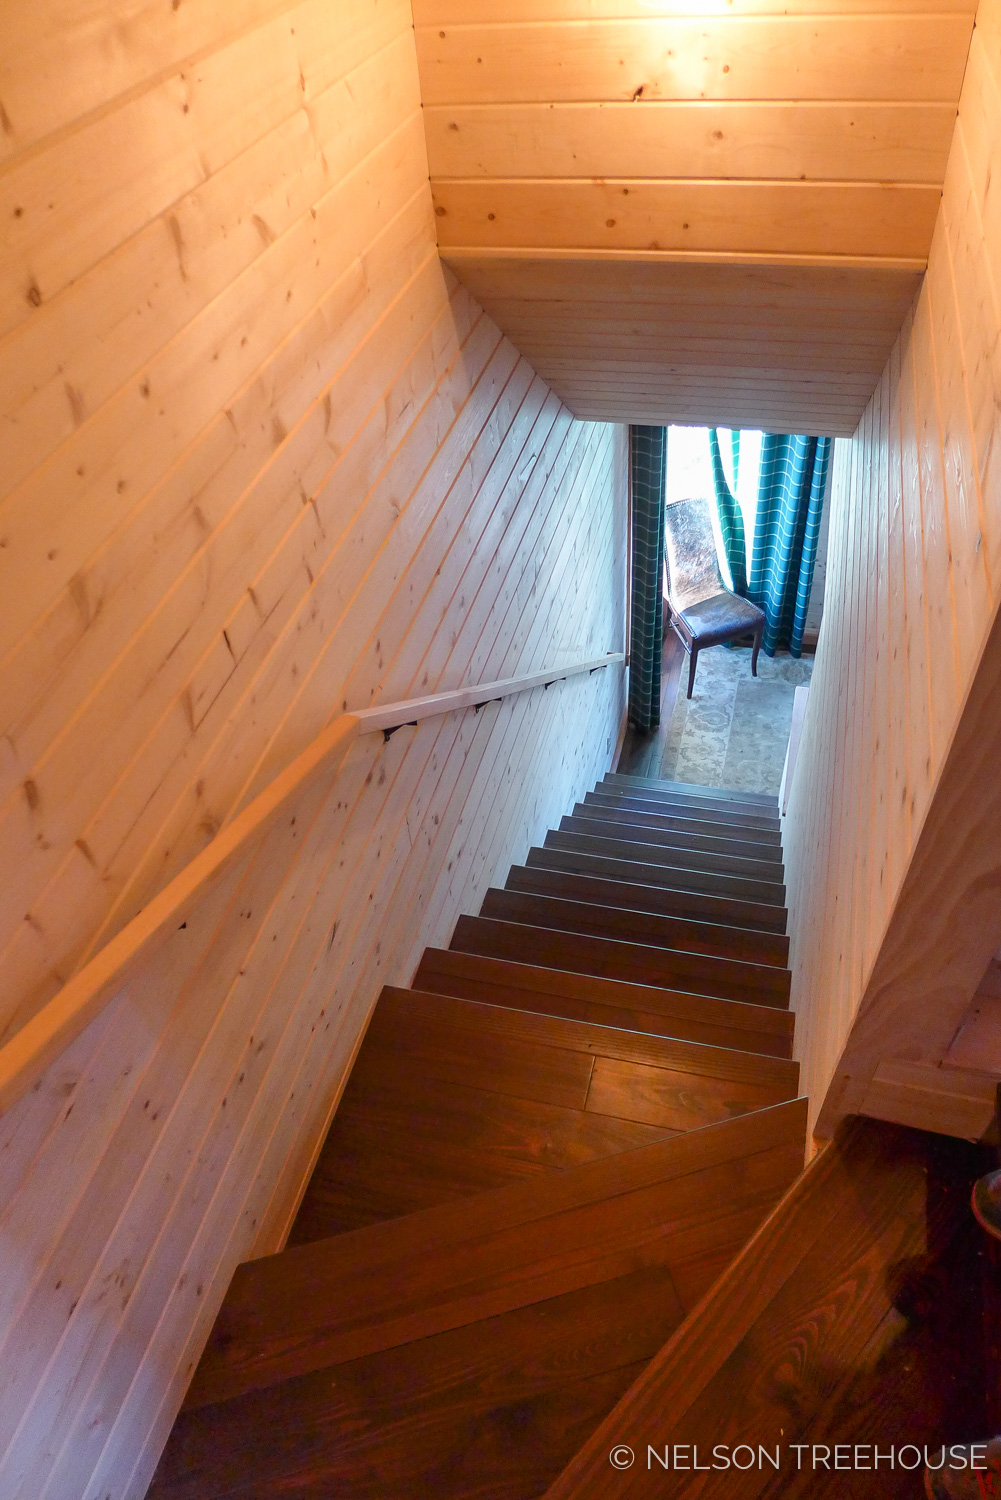  Super Spy Treehouse - Nelson Treehouse 2018 - Staircase to bedroom 